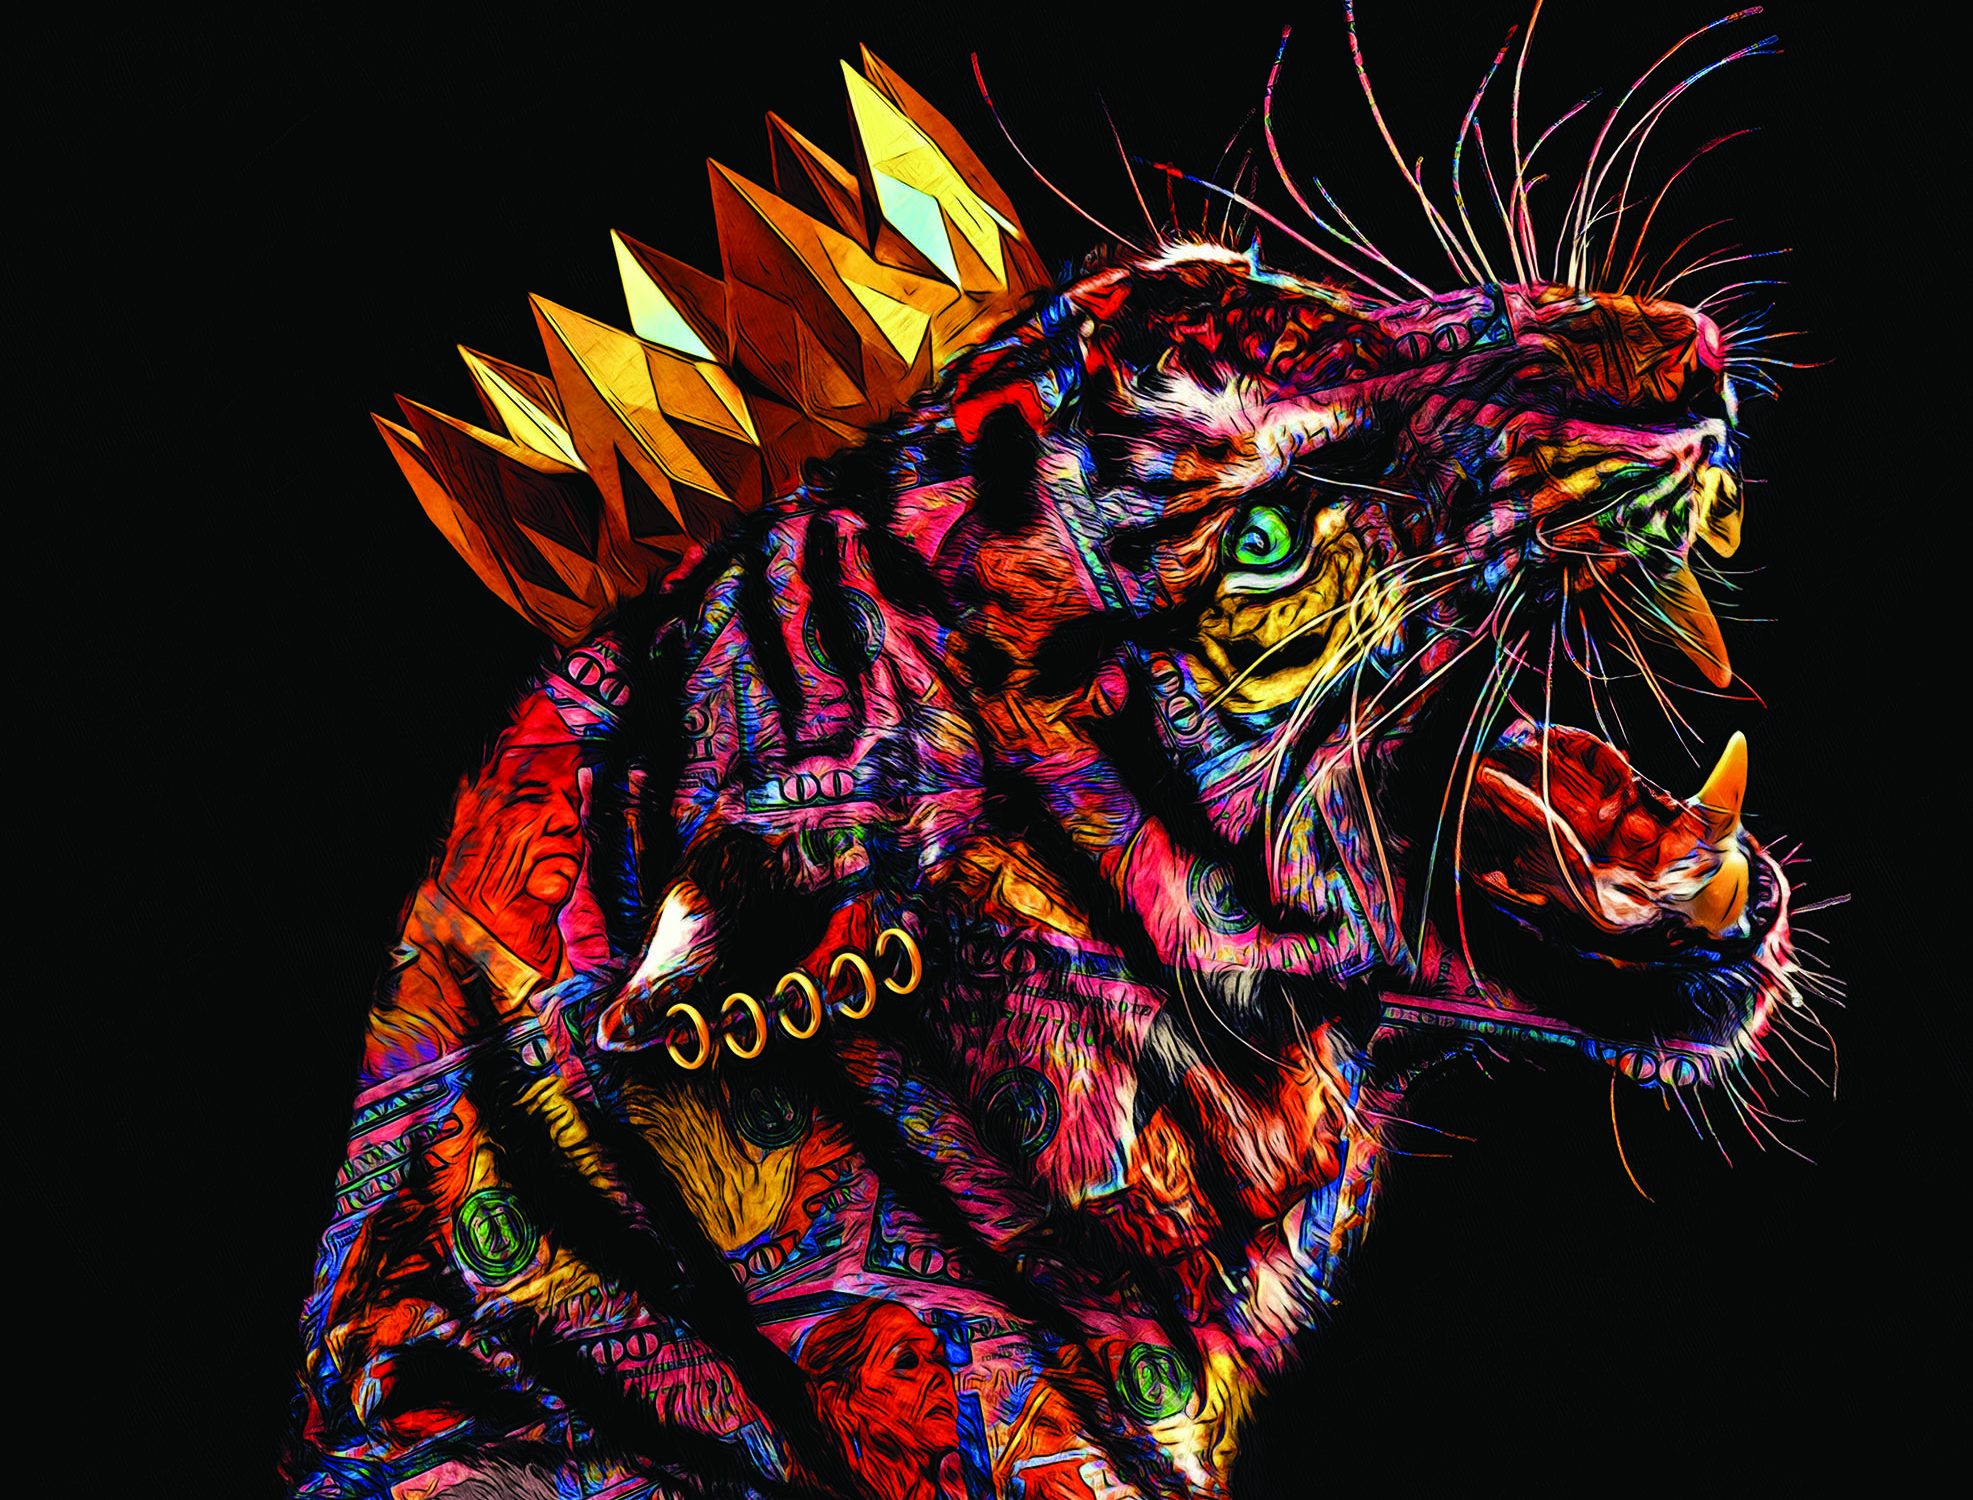 A 'Tiger King' comic book is coming